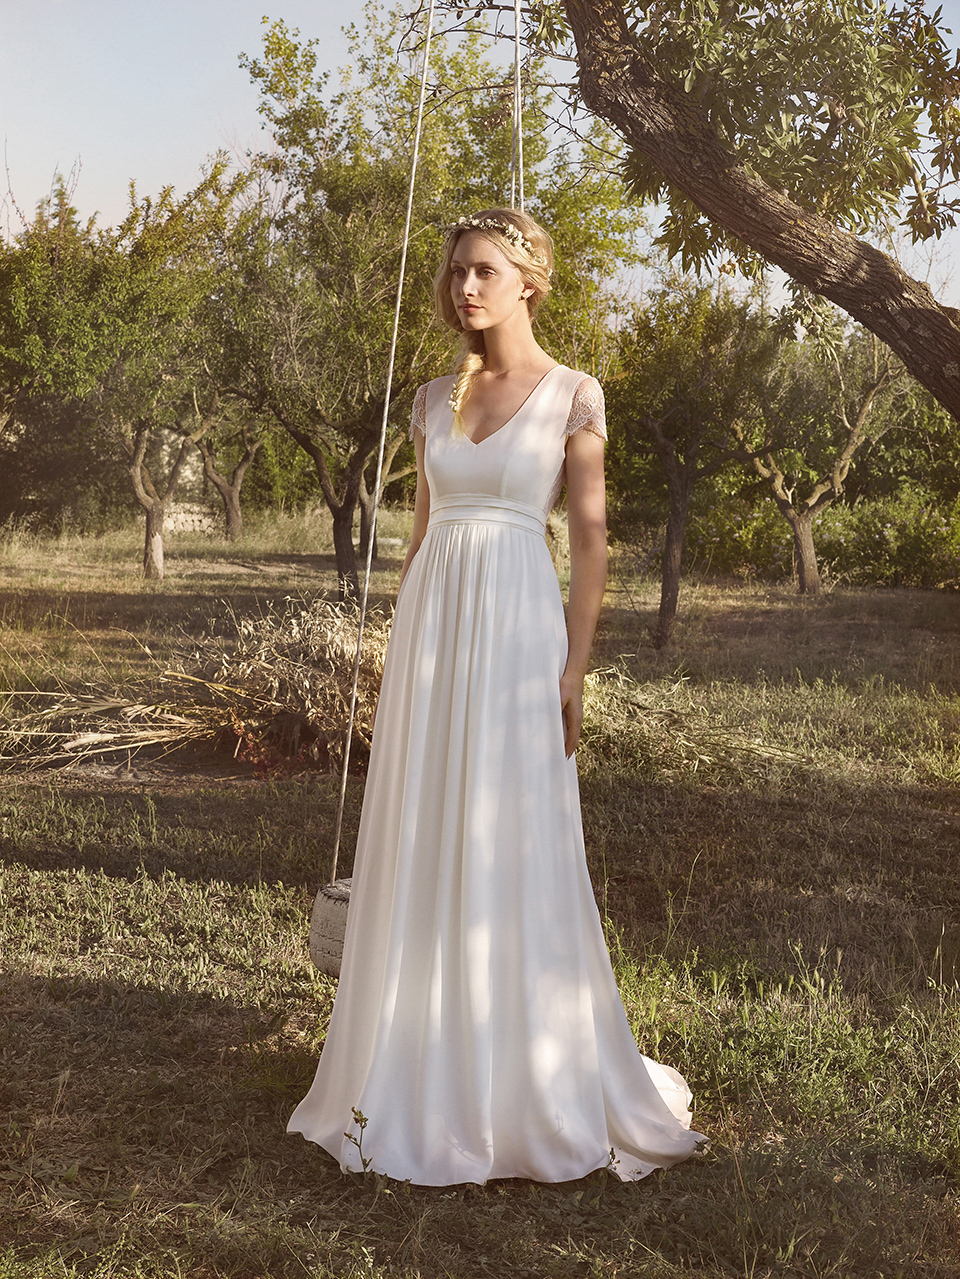 Rembo Styling - bohemian, elegant and fashion forward wedding gowns, visit rembo-styling.com.